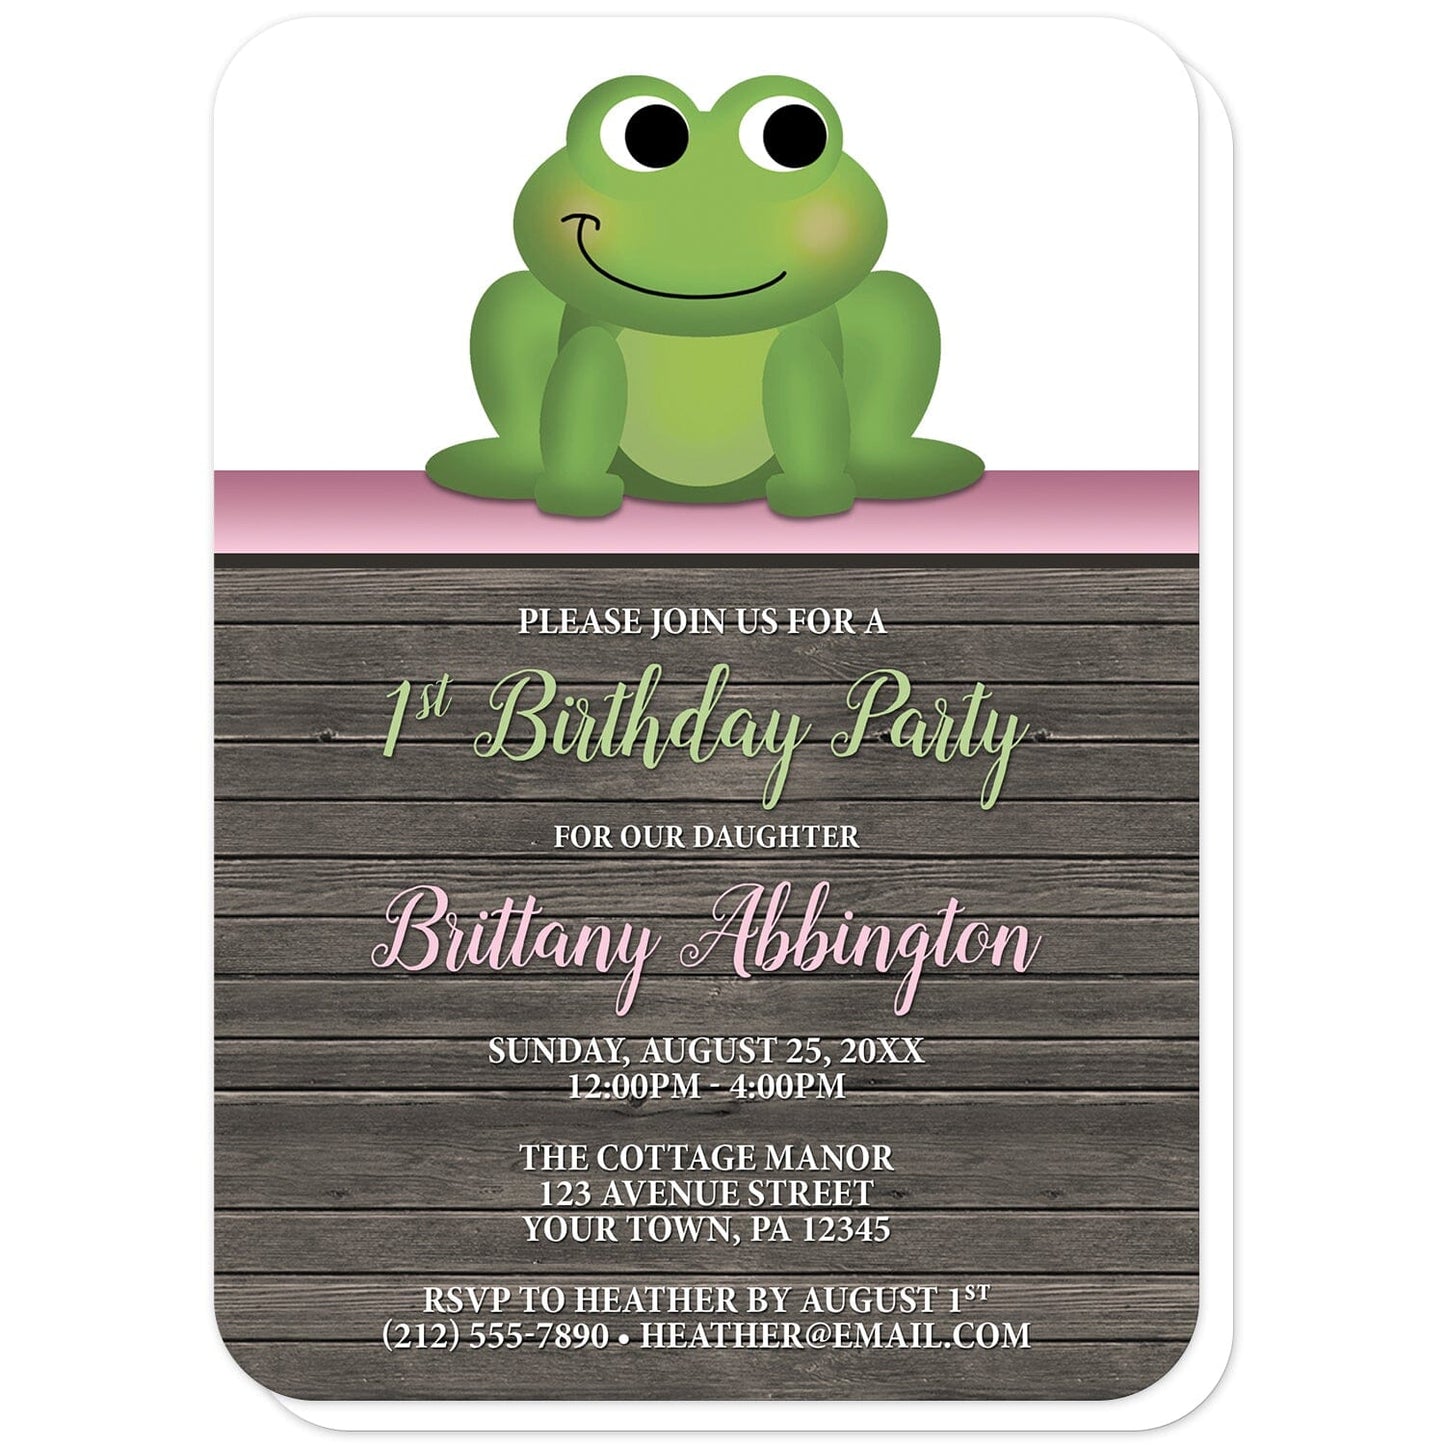 Cute Frog Green Pink Rustic Wood 1st Birthday Invitations (with rounded corners) at Artistically Invited. Cute frog green pink rustic wood 1st birthday invitations with an illustration of an adorable green frog. A gradient pink stripe separates the cute frog from your personalized birthday party details which are custom printed in pink, green, and white over a rustic brown wood background. 